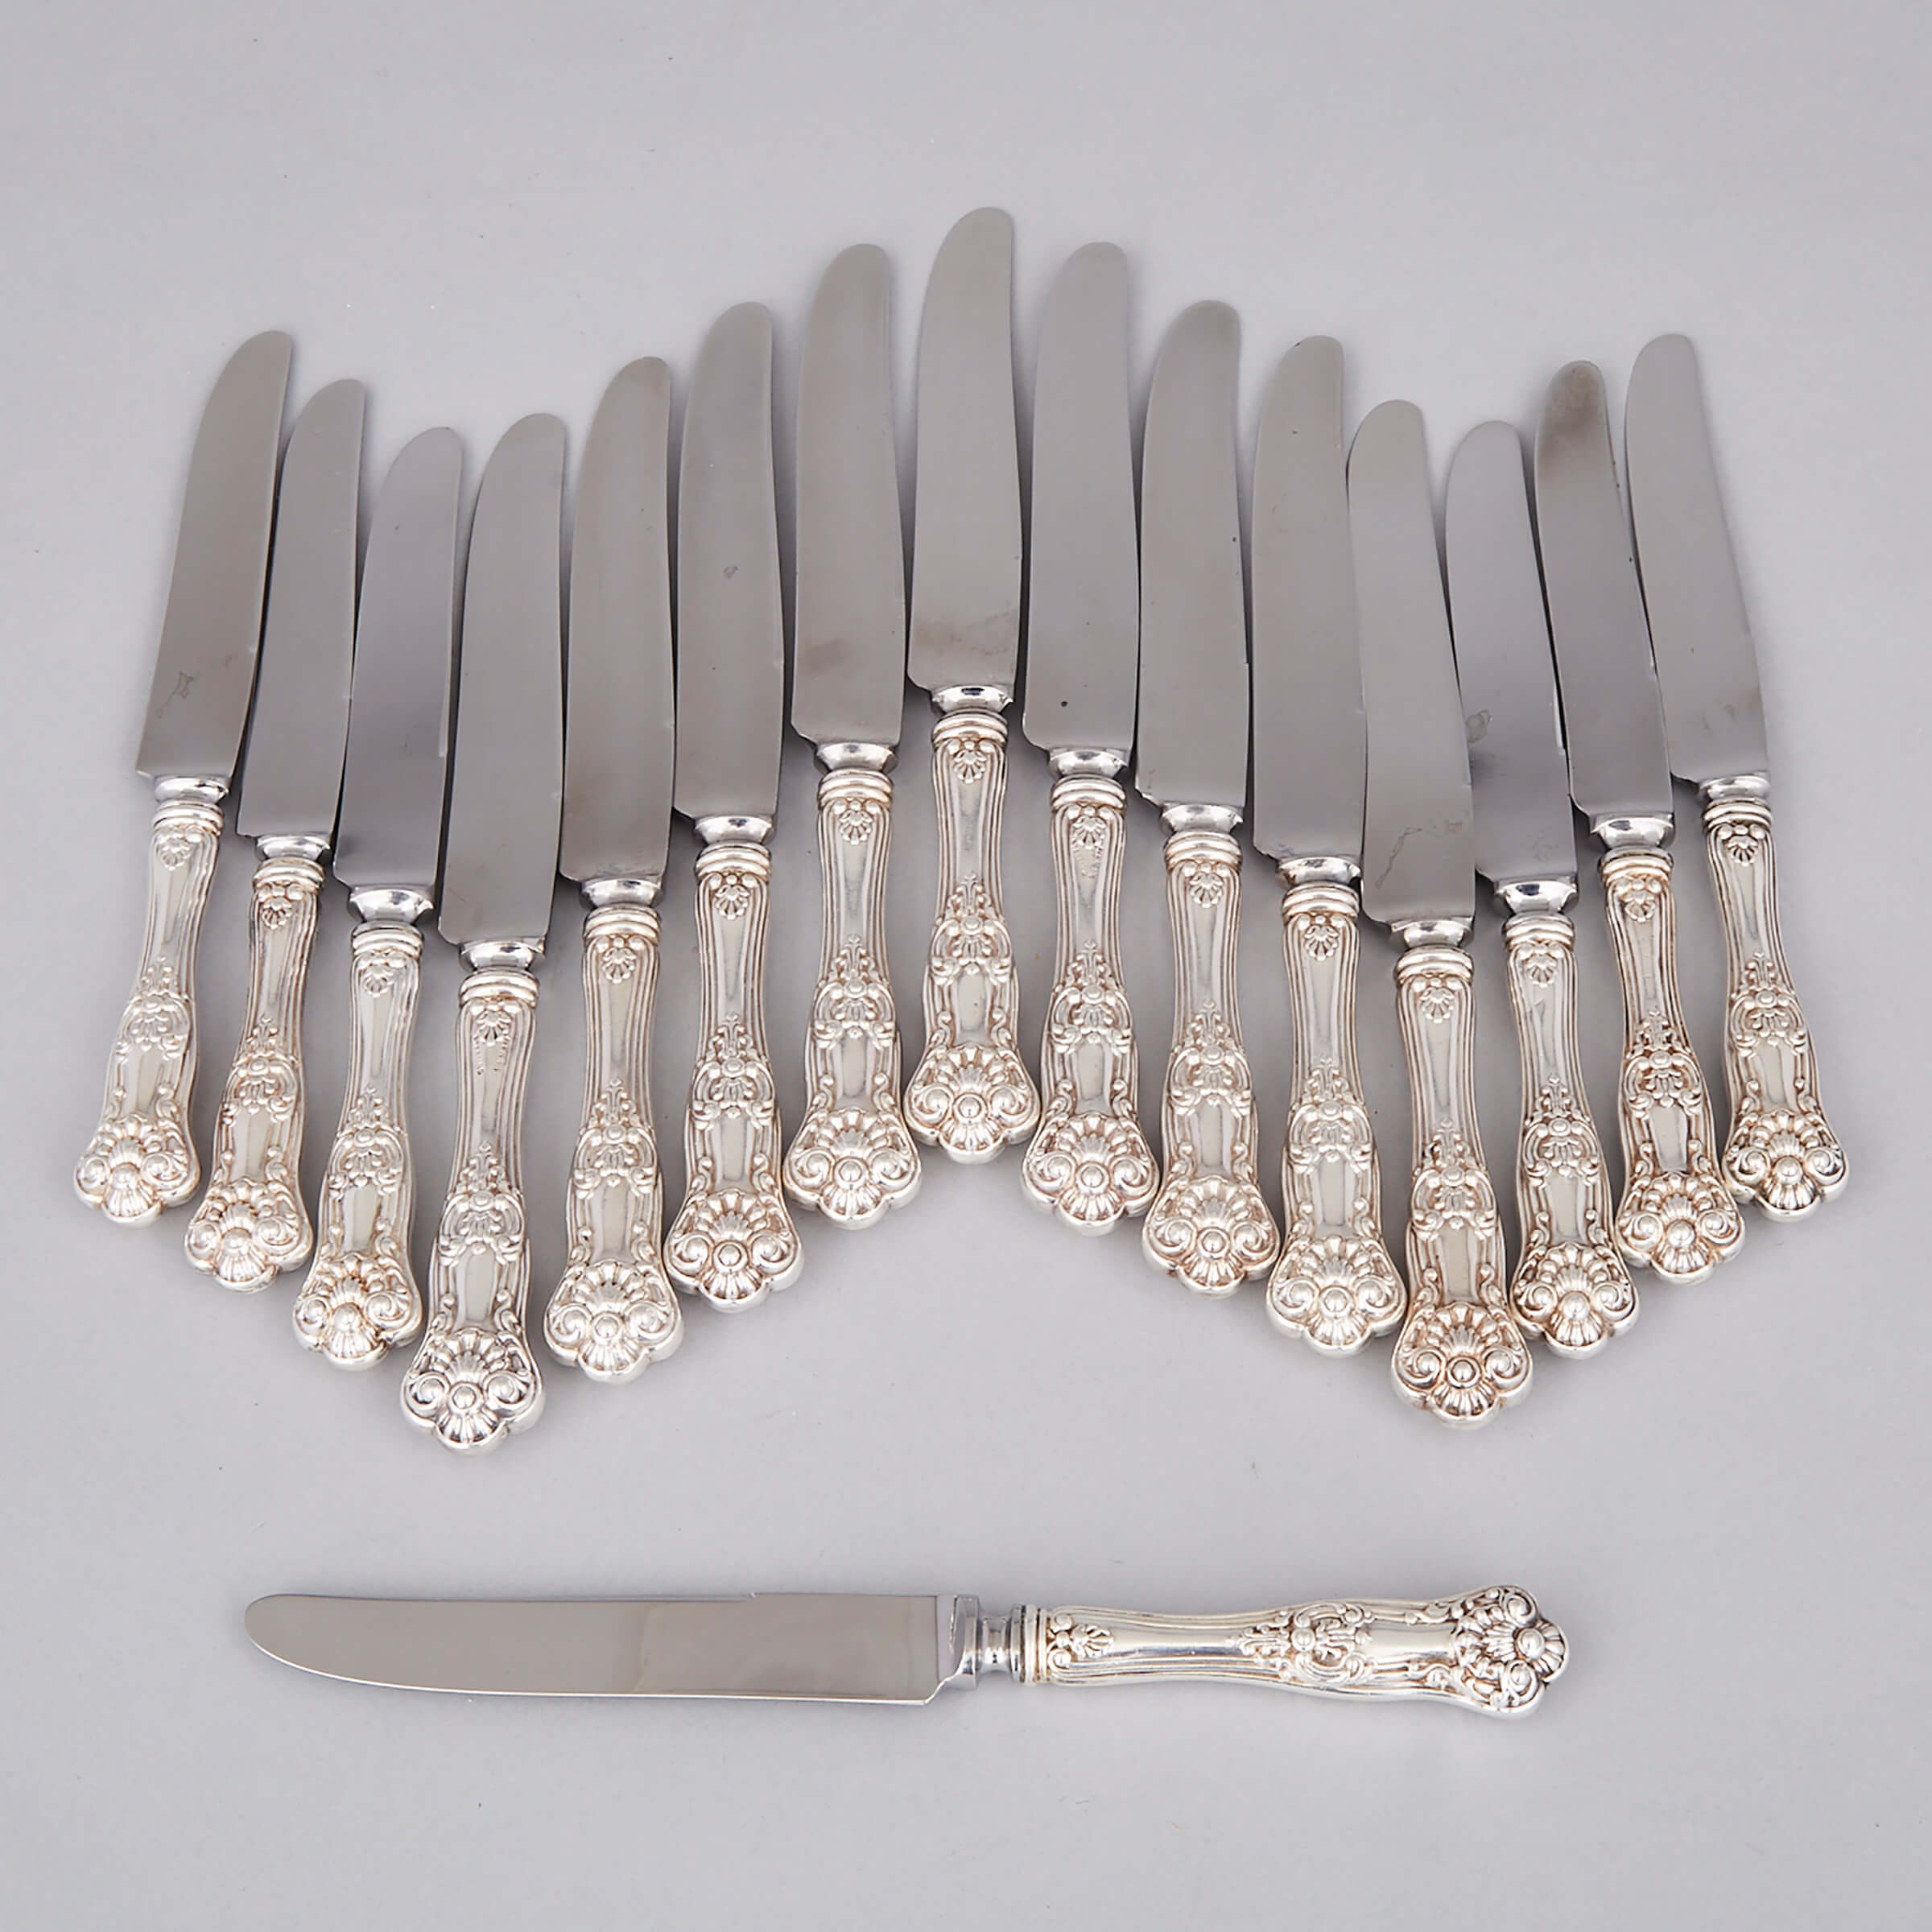 Nine Canadian Silver ‘Queens’ Pattern Dinner Knives and Seven Luncheon Knives, Roden Brothers, Toronto, Ont., early 20th century